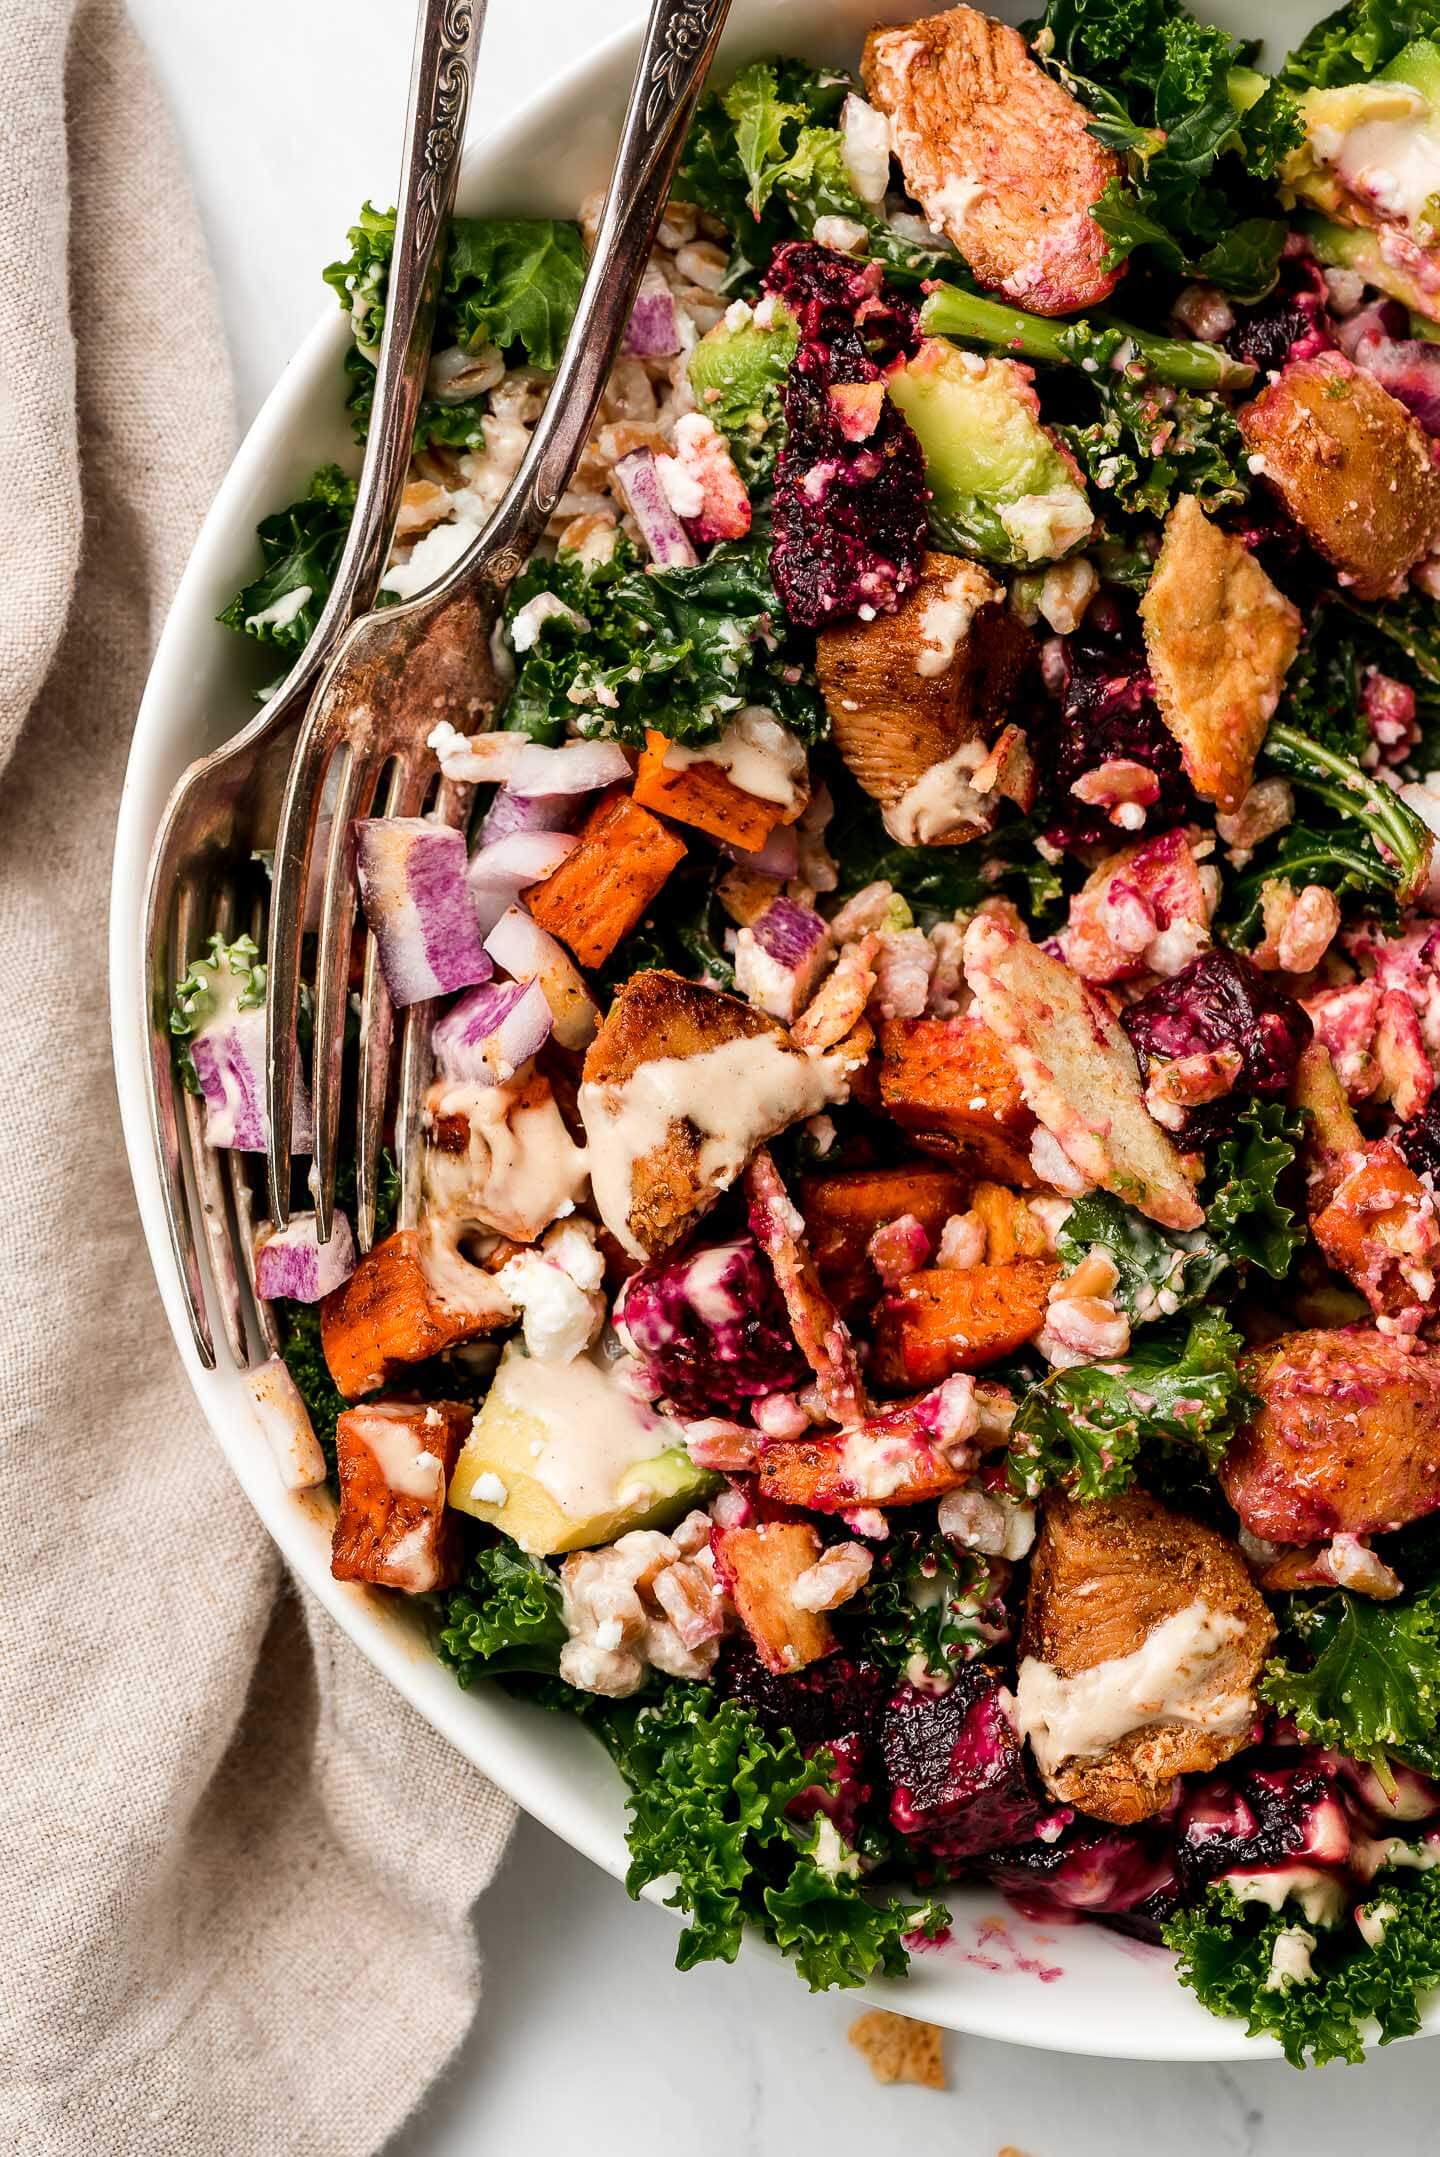 Kale Salad with roasted vegetables and drizzled with tahini dressing with two forks in the side.